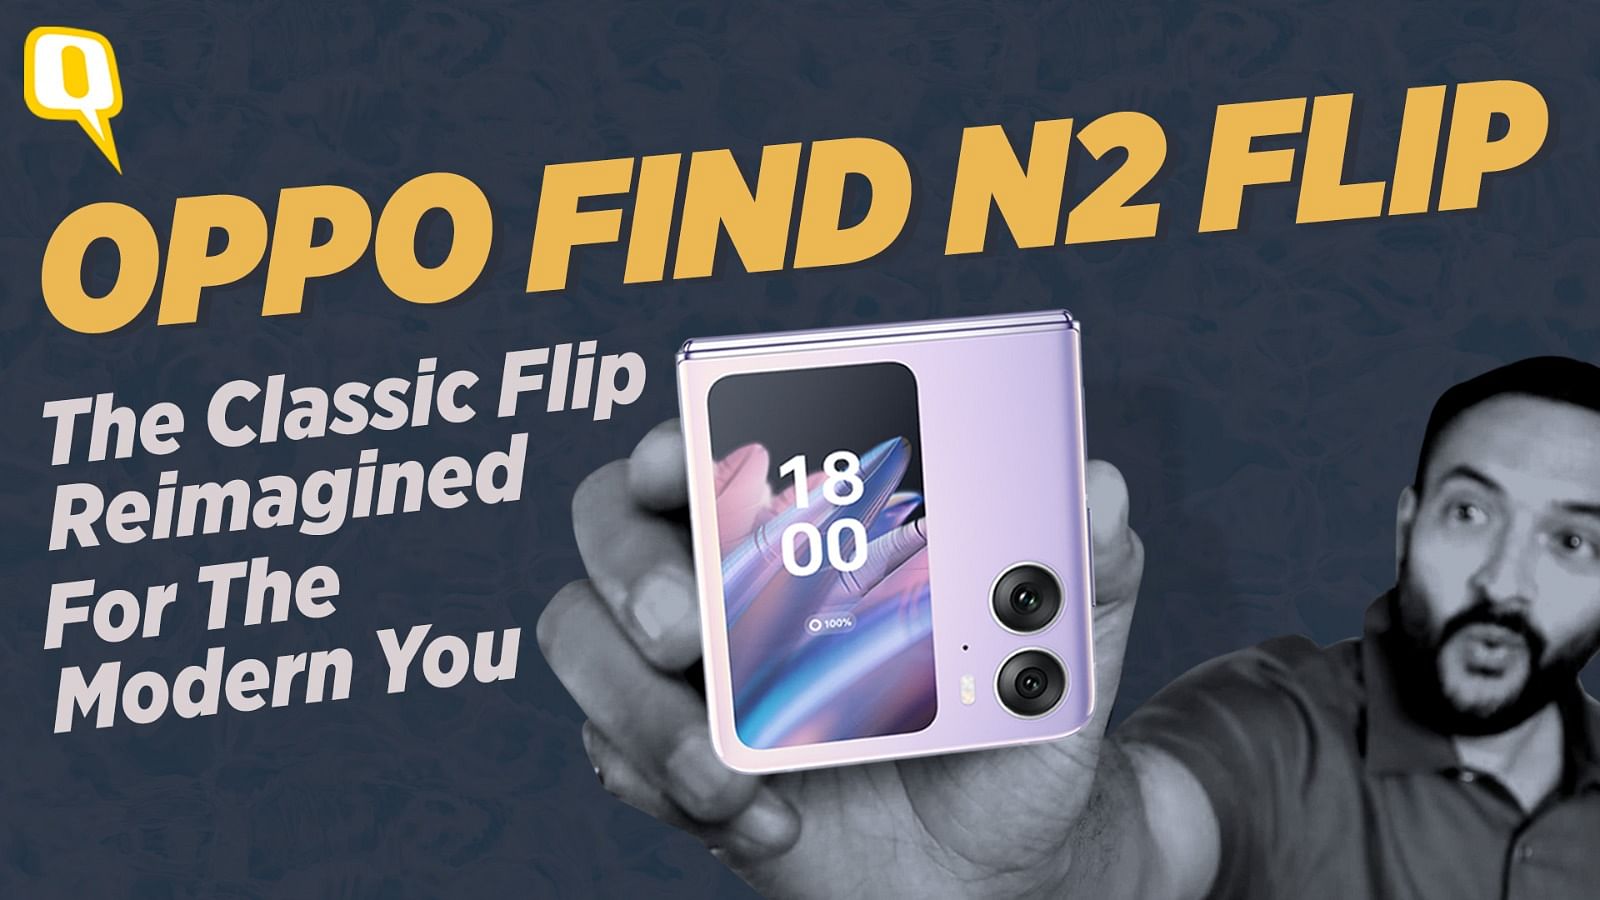 <div class="paragraphs"><p>OPPO Find N2 Flip: The Classic Flip Reimagined For The Modern You</p></div>